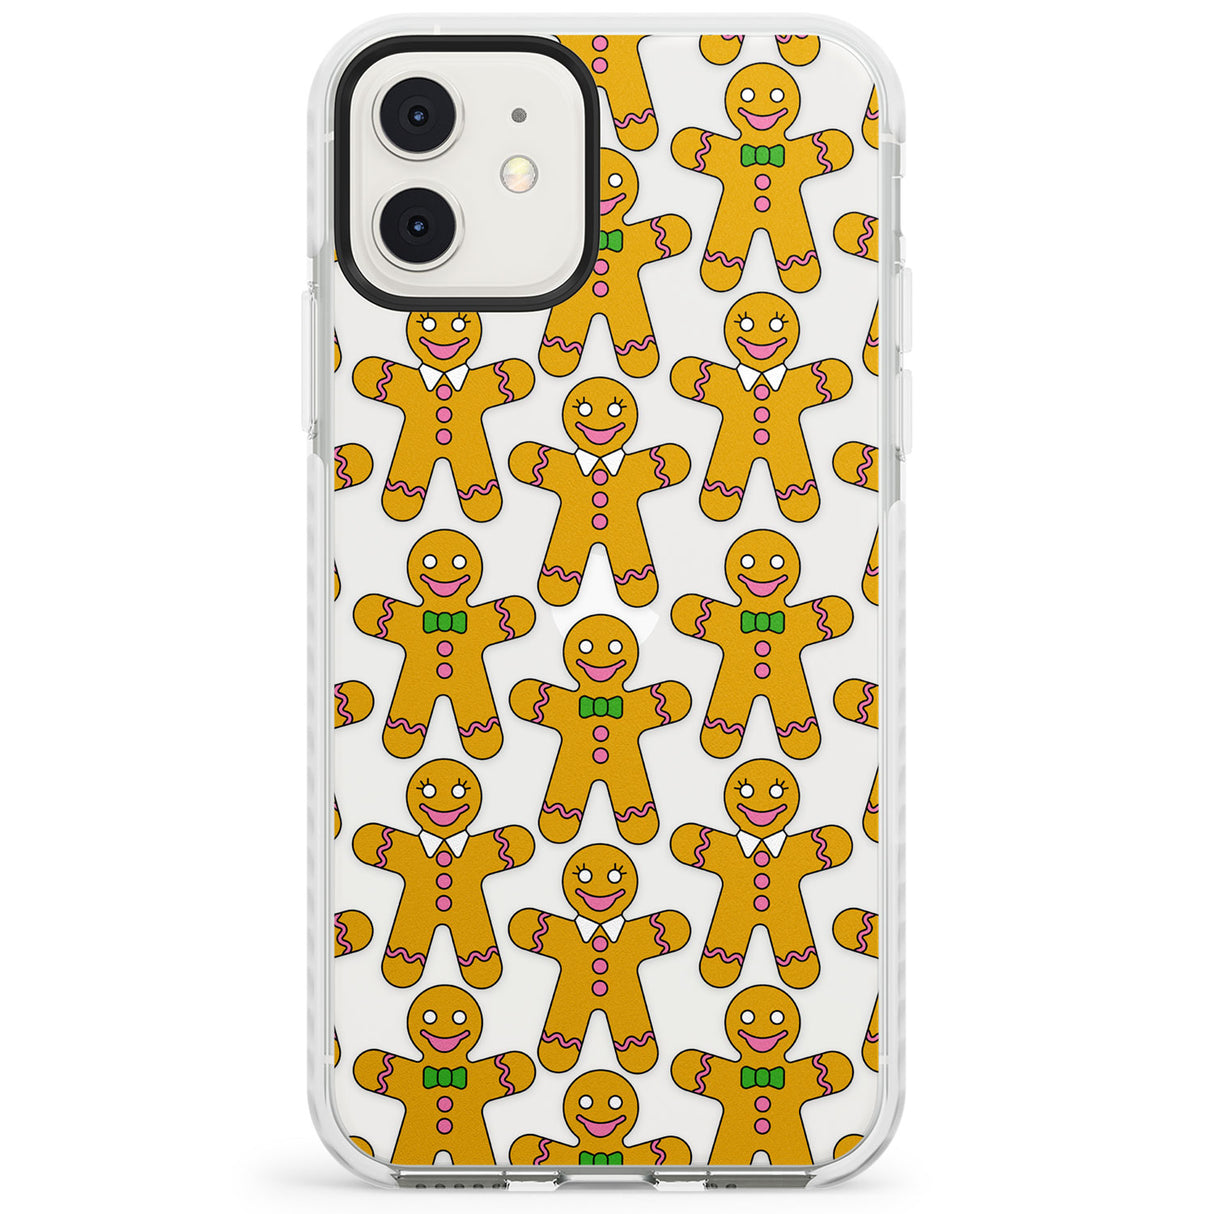 Gingerbread Cookie Pattern Impact Phone Case for iPhone 11, iphone 12